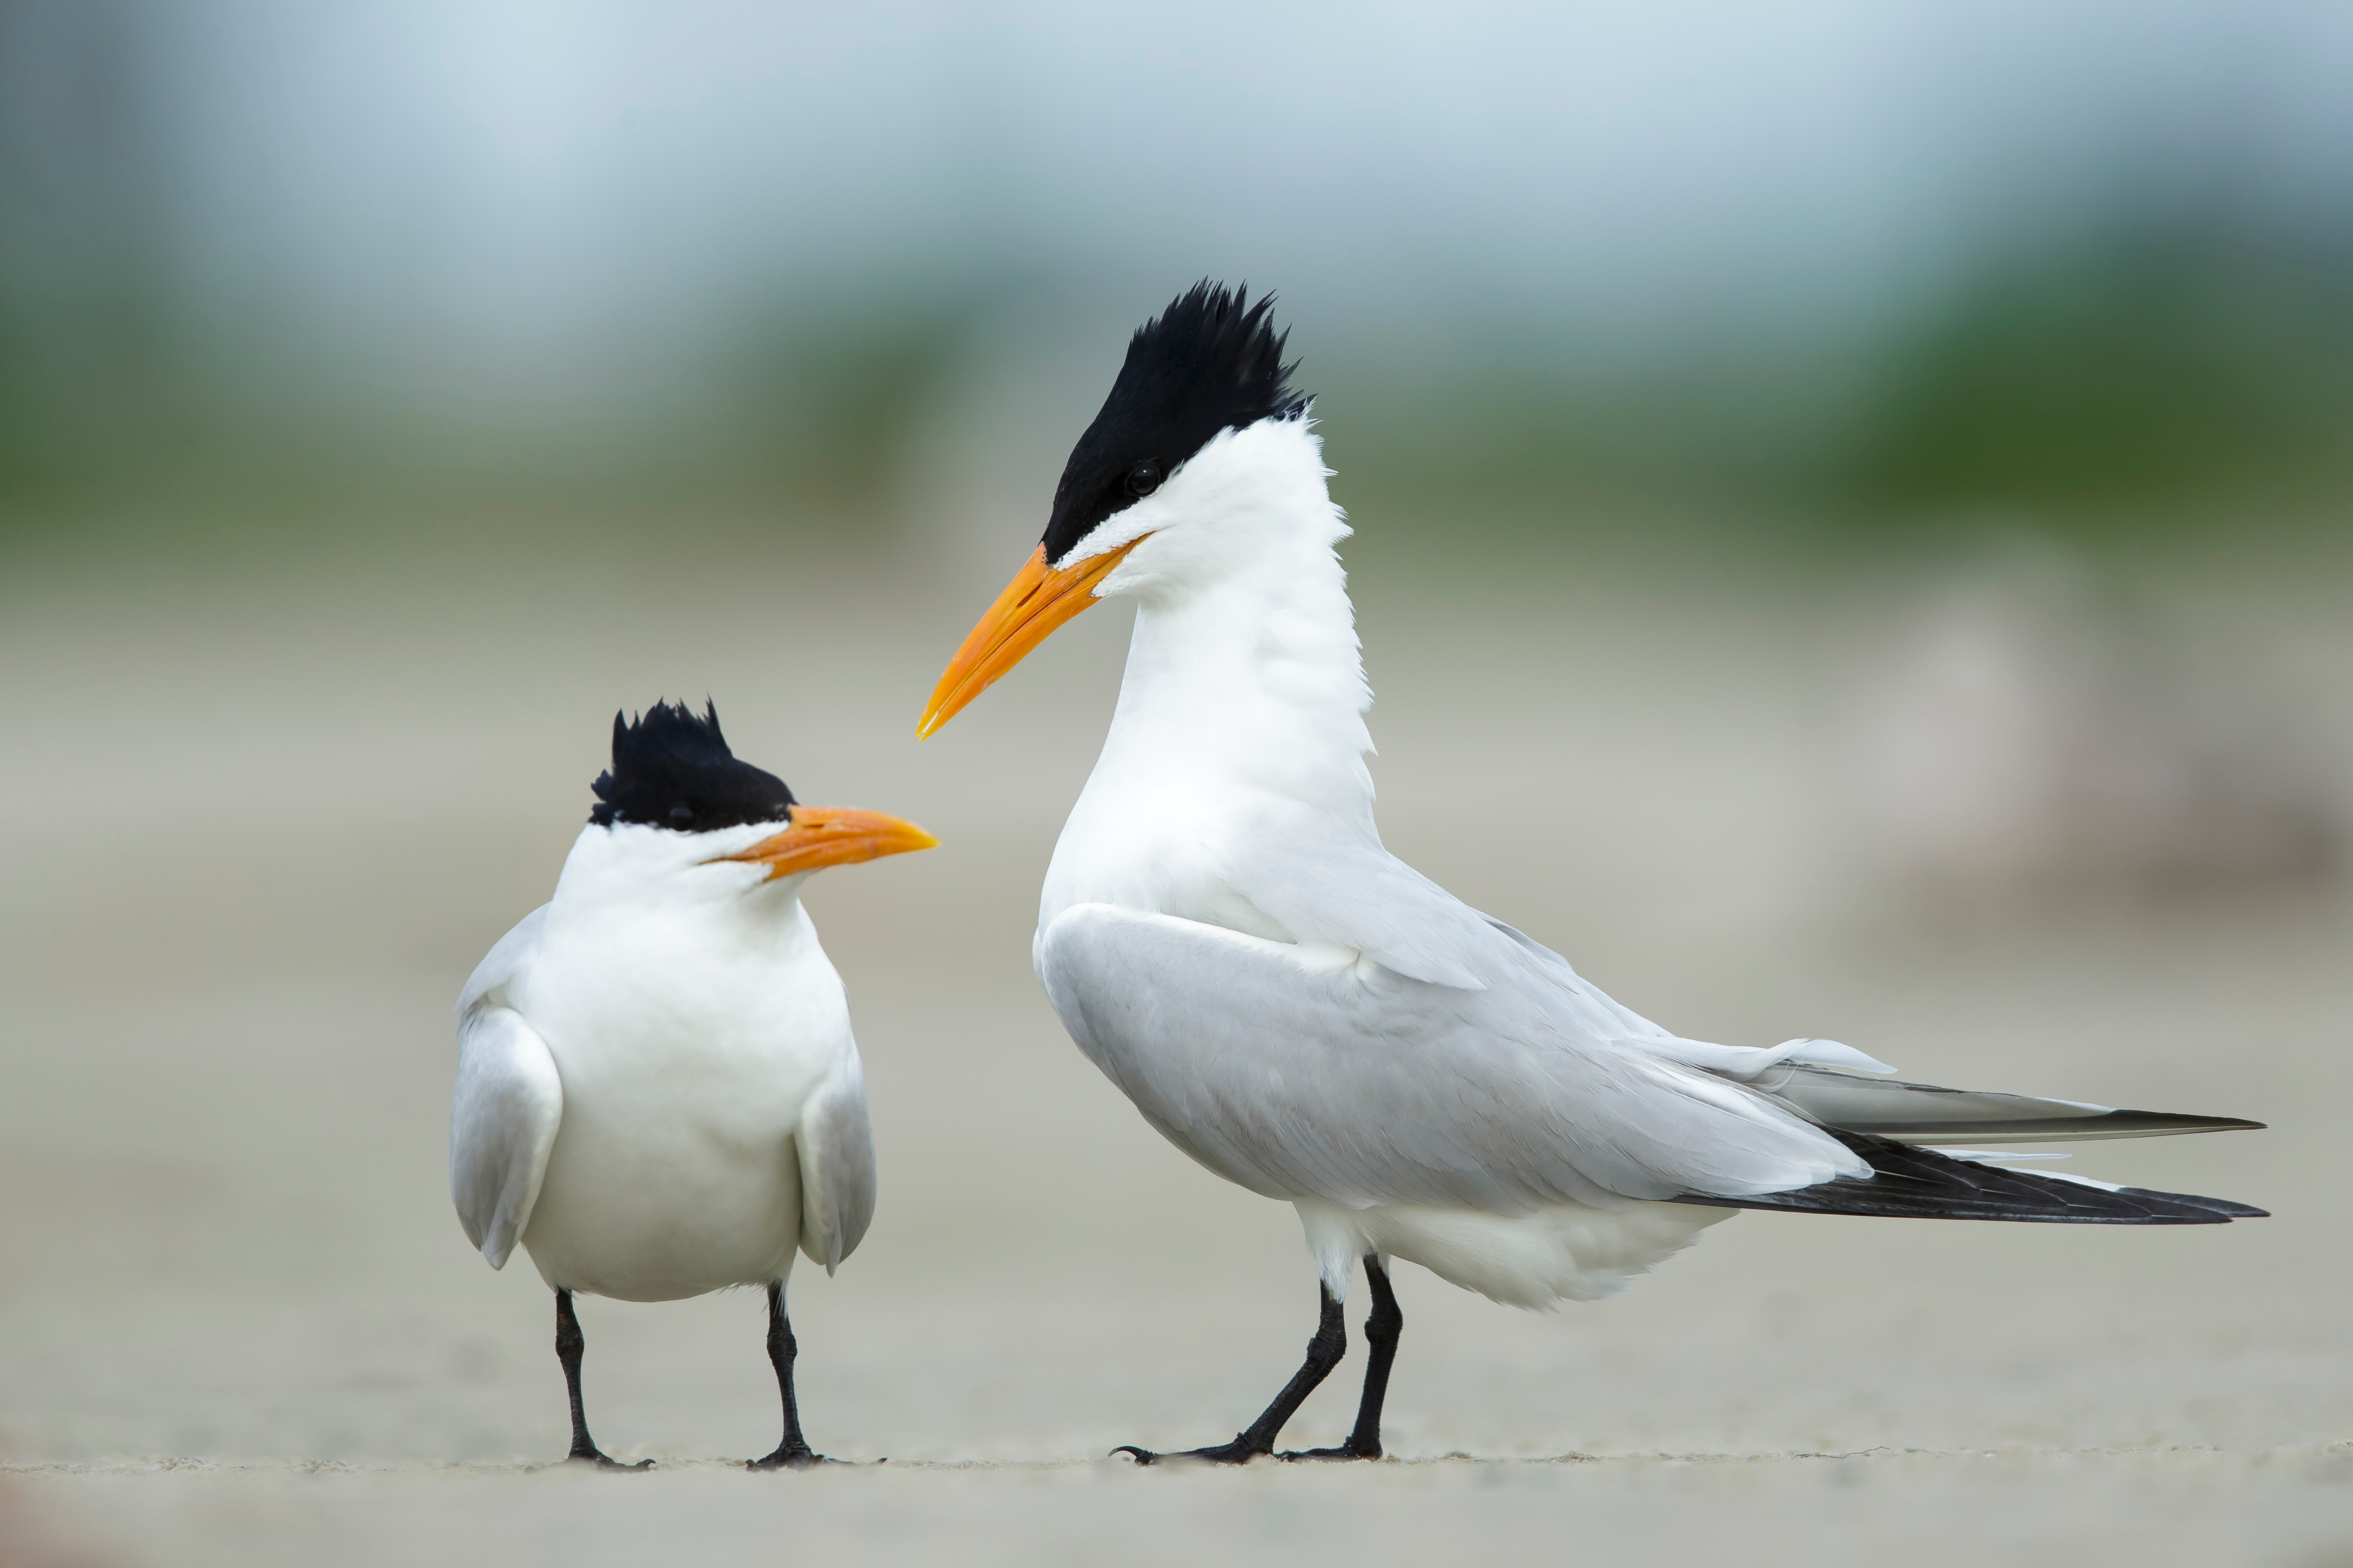 Two black and white Royal Terns on the beach with background out of focus.